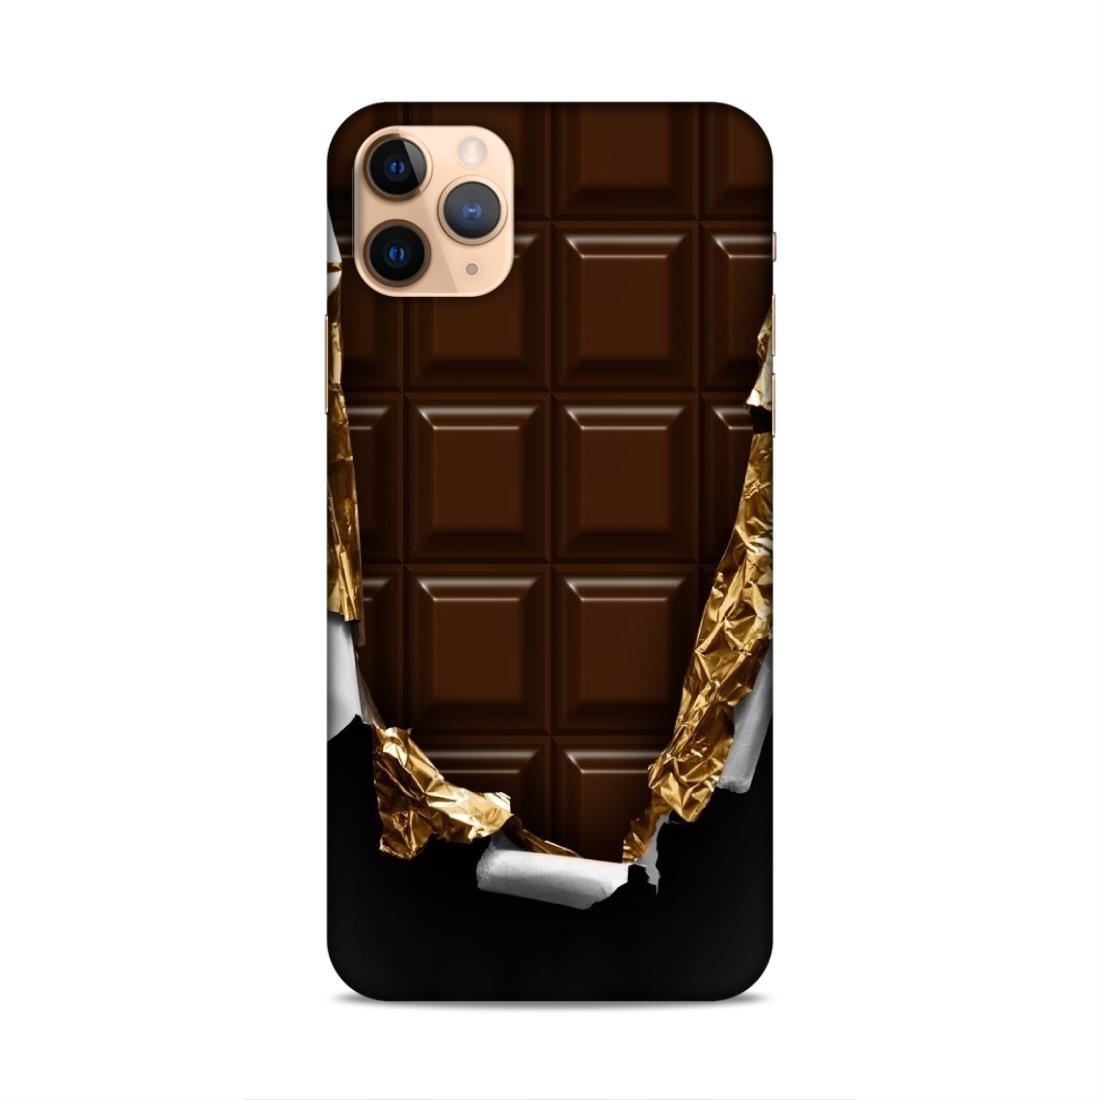 Chocolate Hard Back Case For Apple iPhone 11 Pro